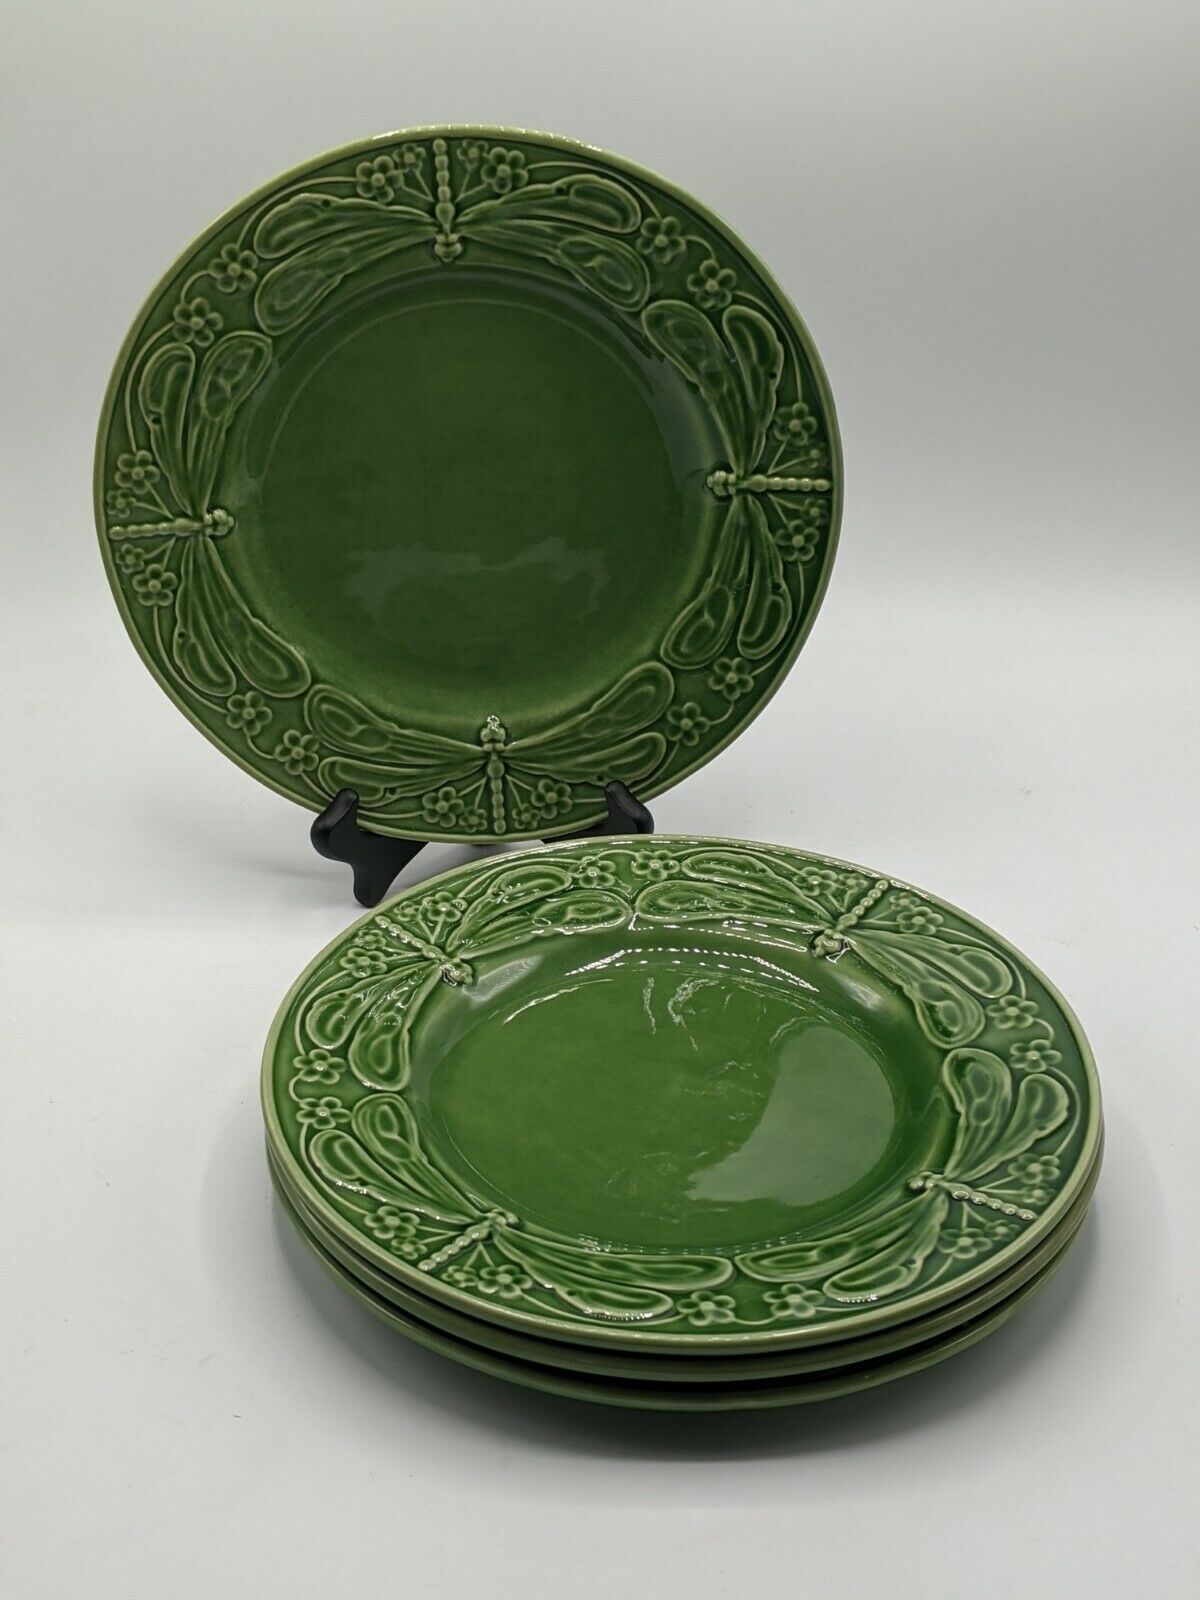 4 World Market Dragonfly Green Majolica Dinner Plates Made In Portugal Crazing